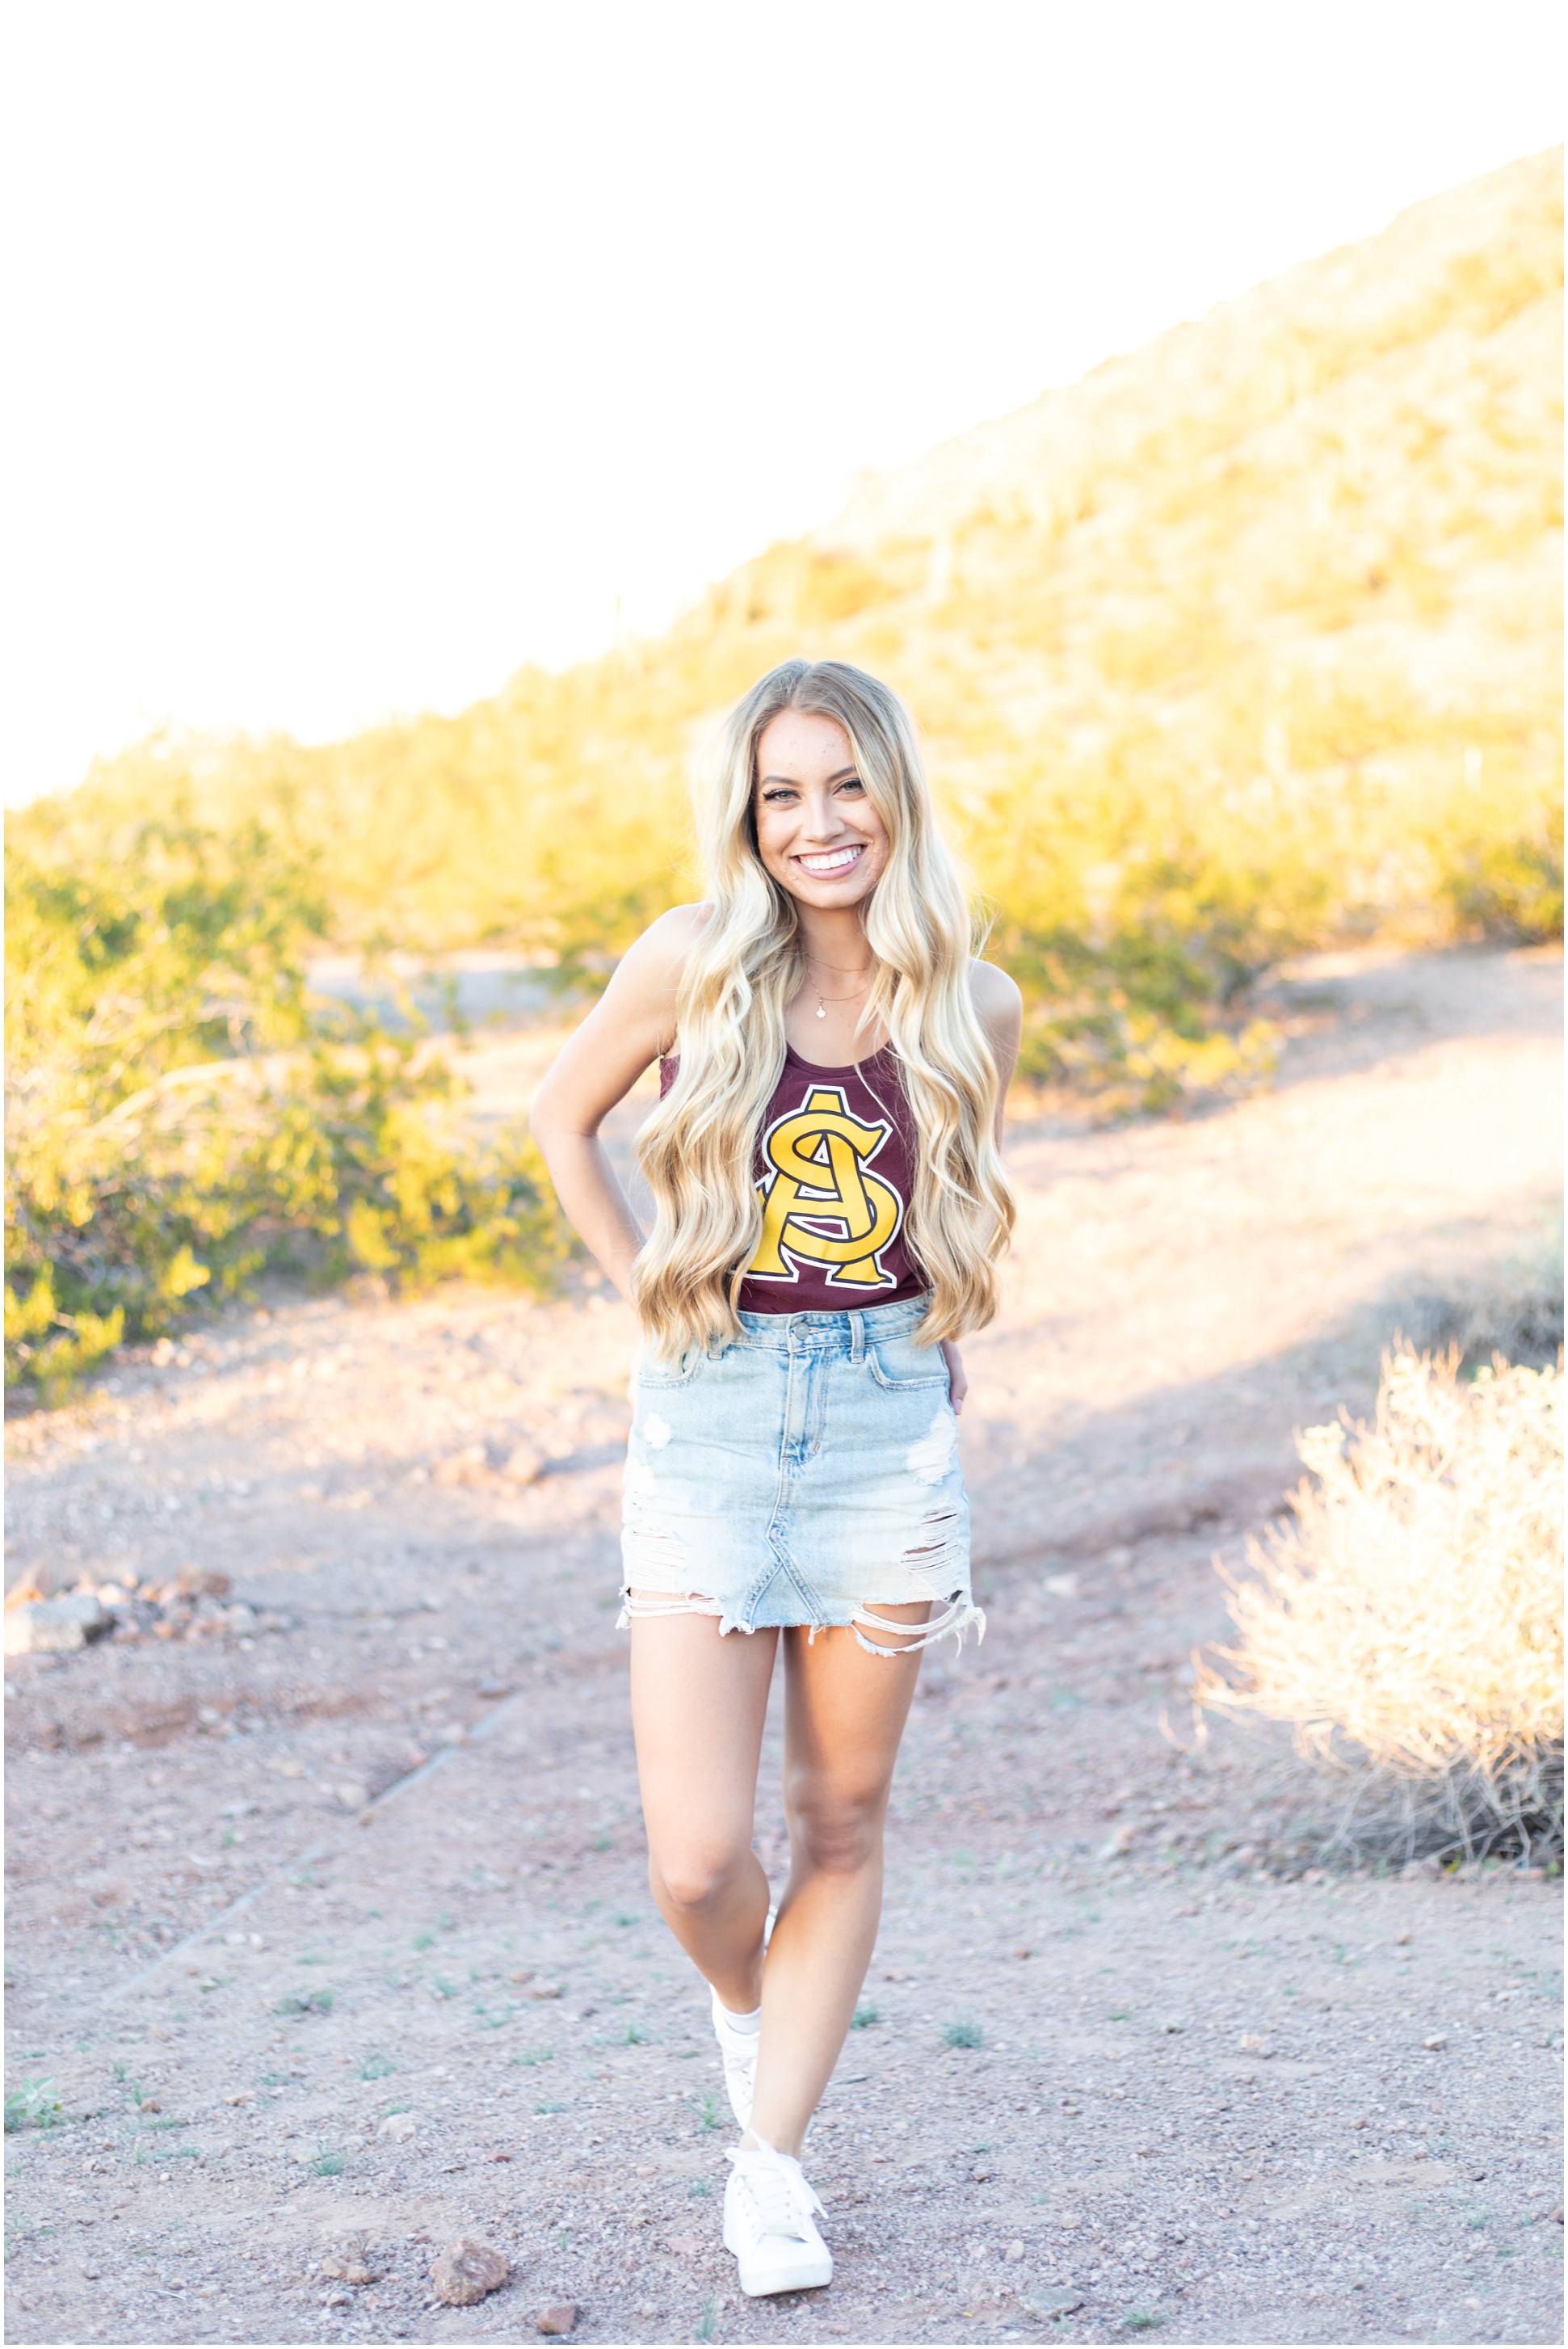 Ally Bascom's Graduation Portraits from ASU Tempe at Papago Park by MaeWood Photography